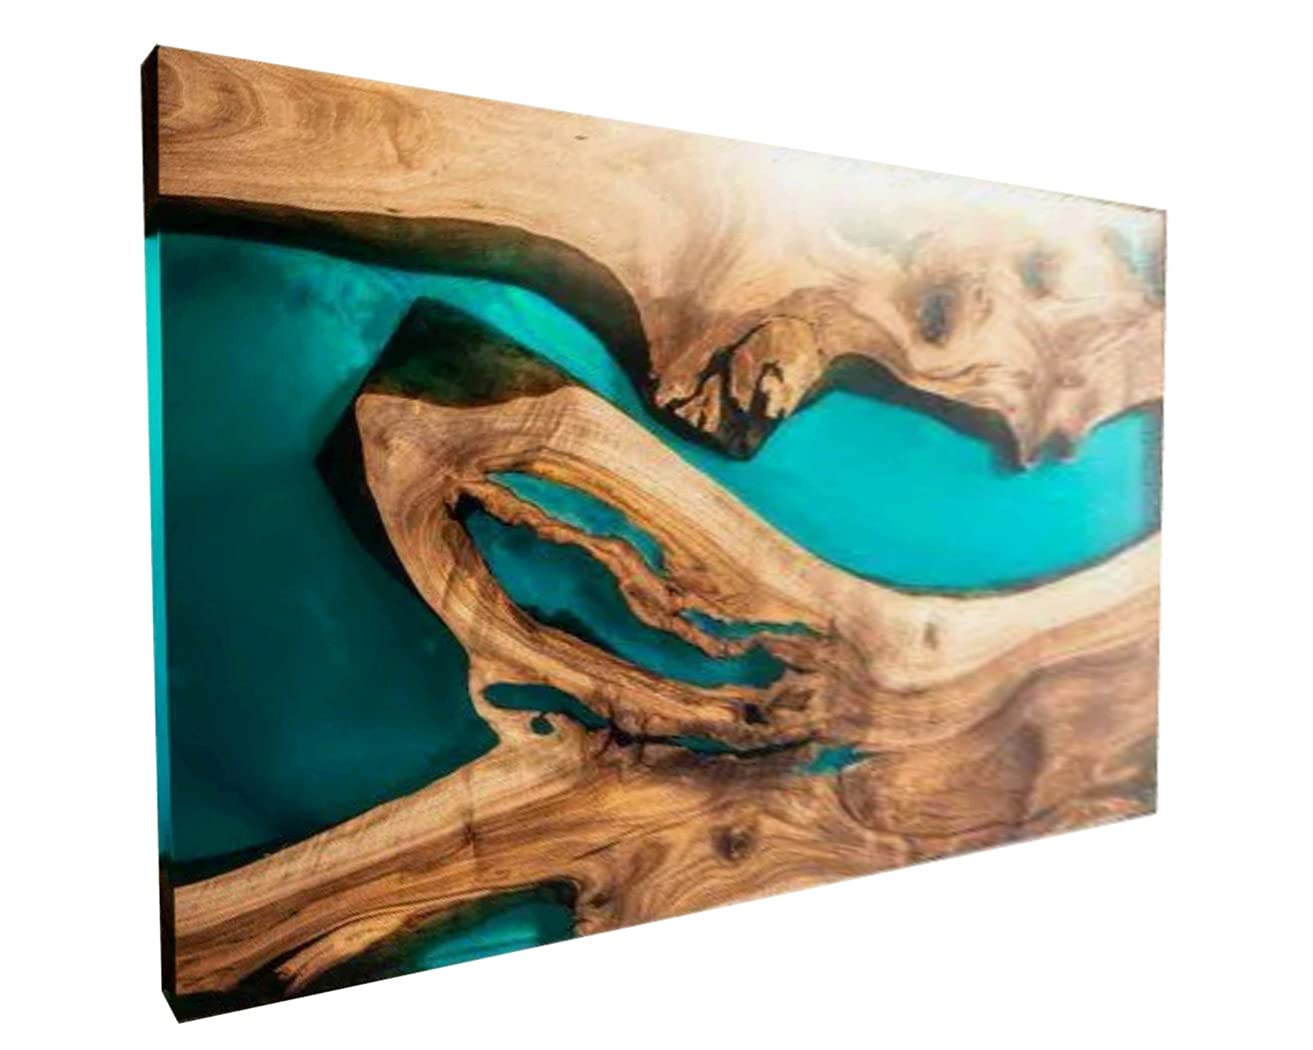 Epoxy Table, Epoxy Resin River Table, Live Edge Wooden Table, Natural Wood,Dining Table, Natural Epoxy Table, Resin Table